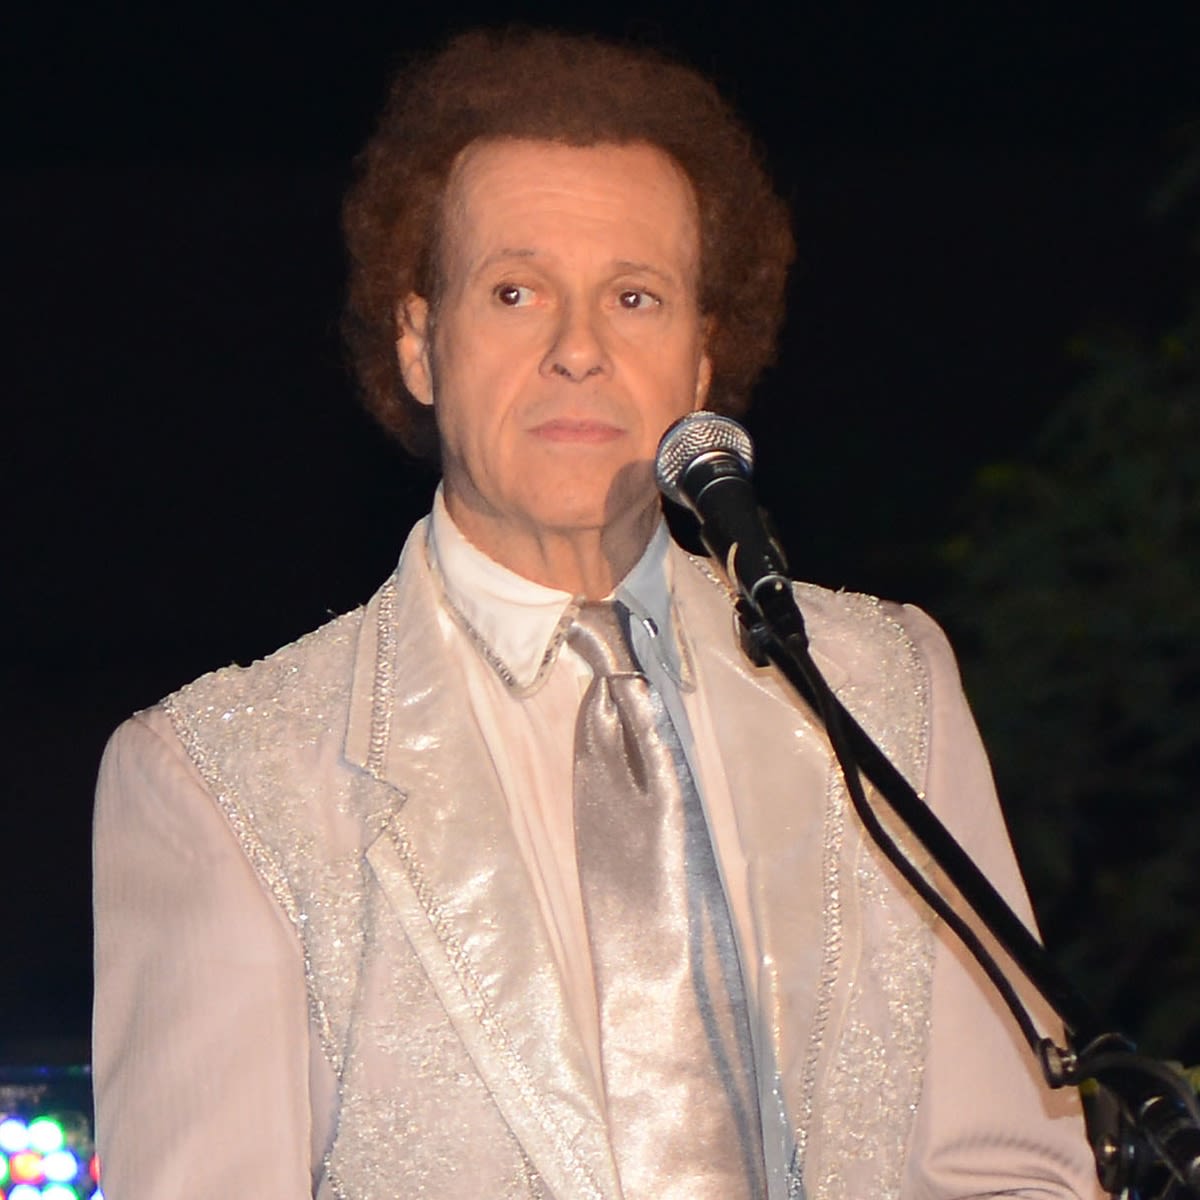 Richard Simmons’ Cause of Death Under Investigation